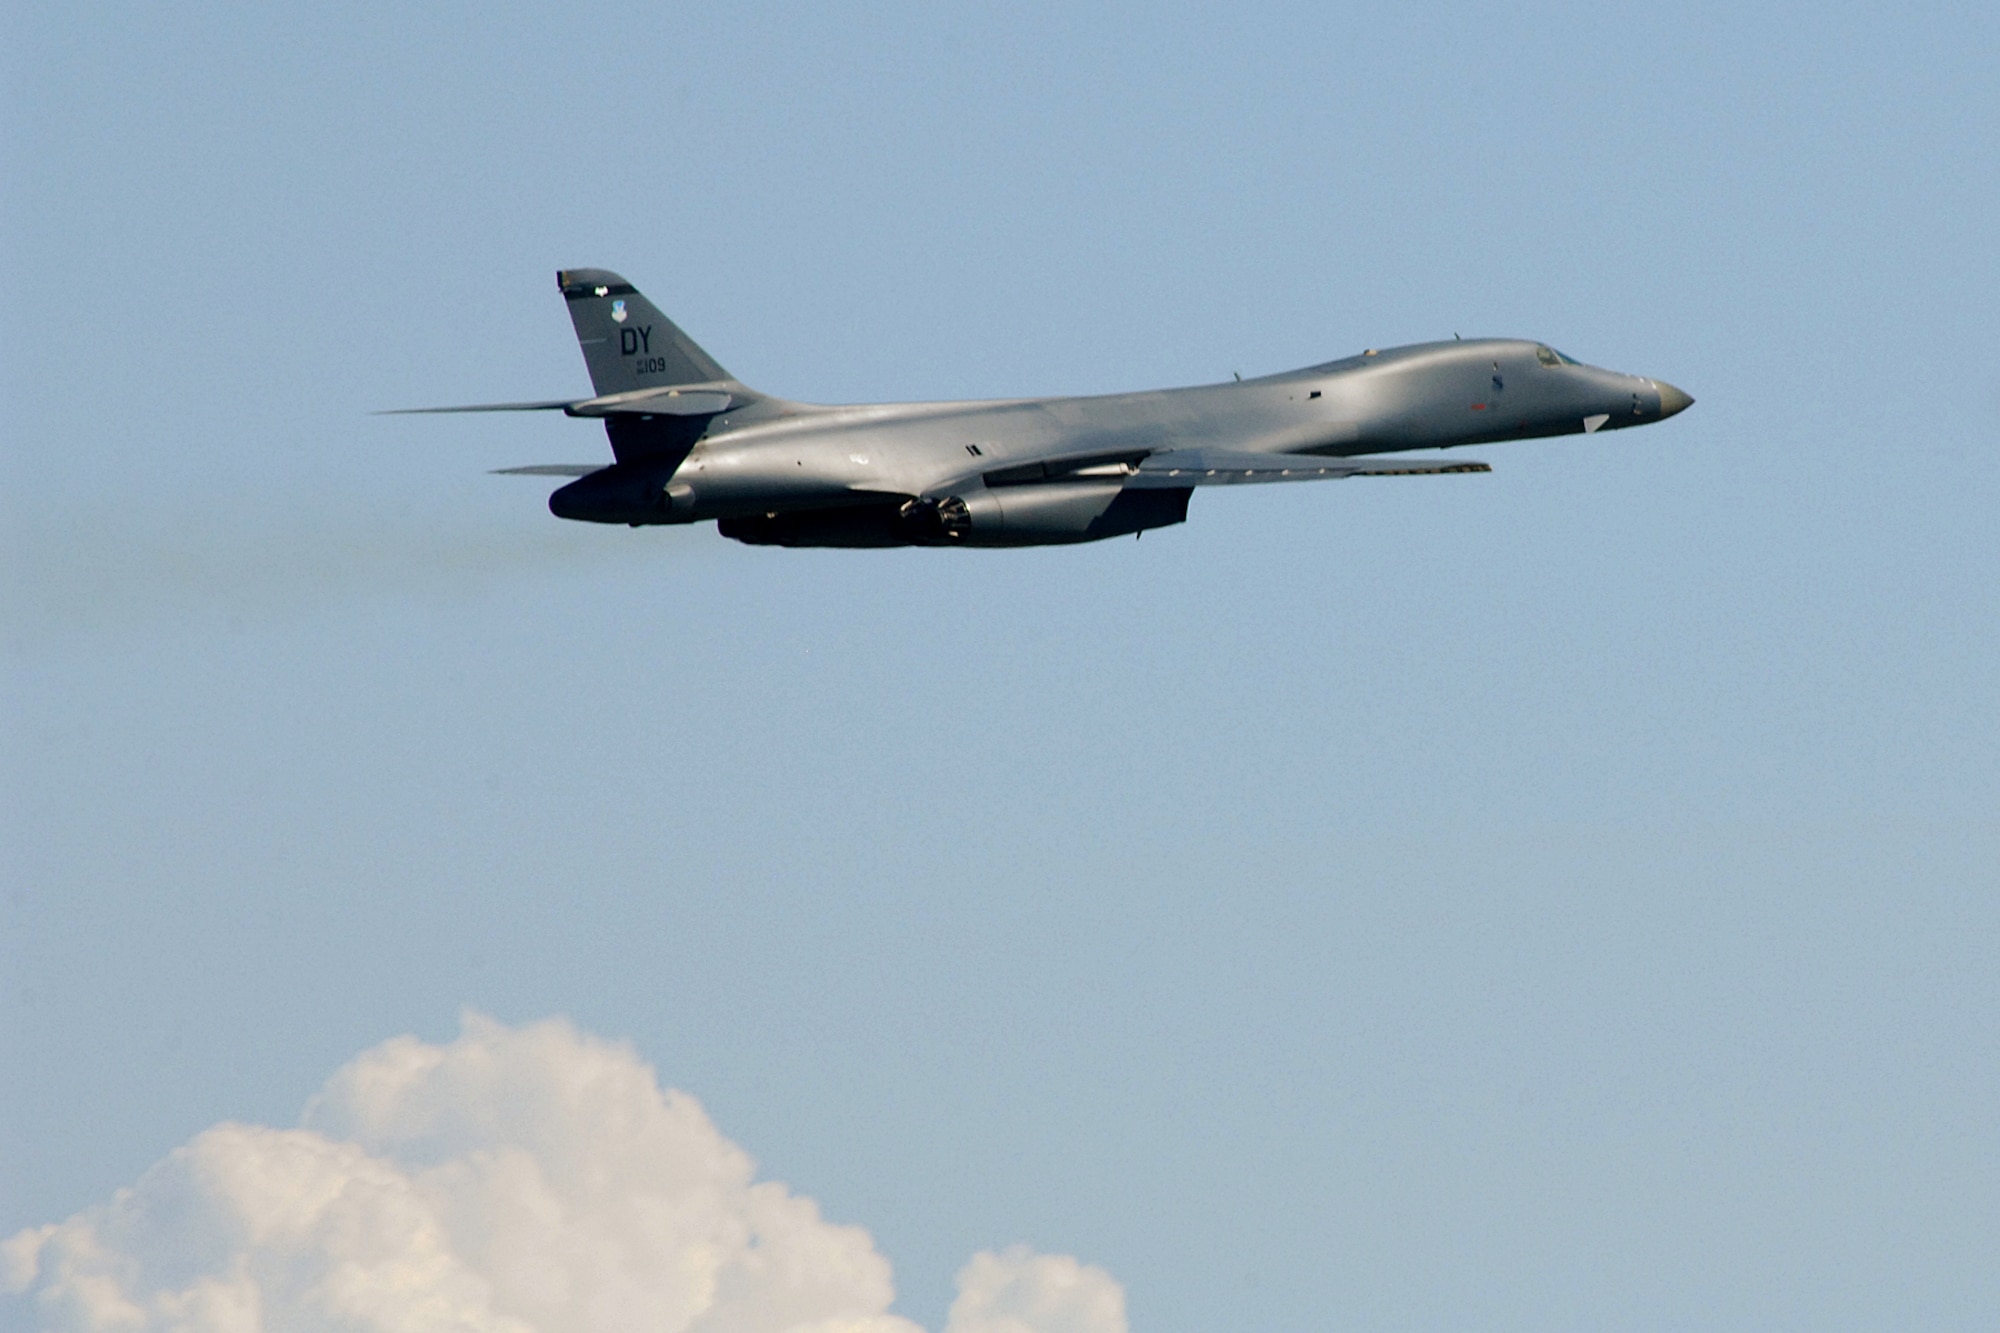 A B-1B Lancer from Dyess Air Force Base, Texas, flies over Selfridge Air National Guard Base, Mich., Aug. 19, 2011. The Lancer was visiting the base for the Selfridge Air Show and Open House, Aug. 20-21. (USAF photo by John S. Swanson)